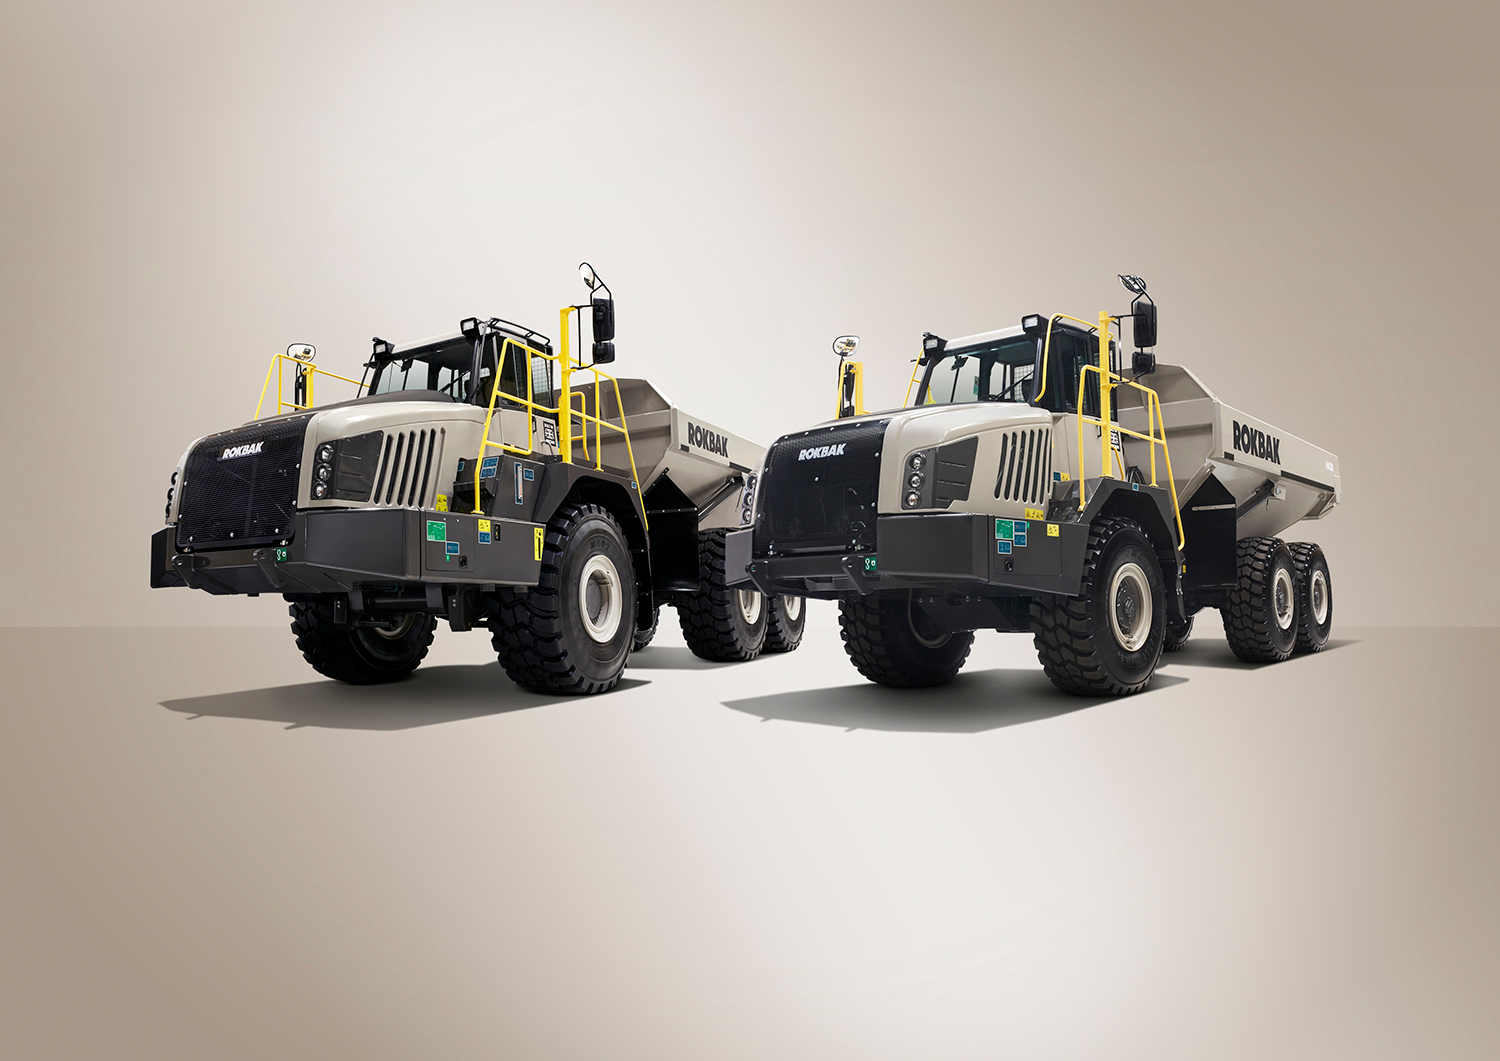 Volvo traces the Rokbak lineage back to 1934 when Euclid Road Machinery built what Volvo calls the world's first off-road truck, the Model 1Z. The trucks have been made in Motherwell, Scotland since 1950.